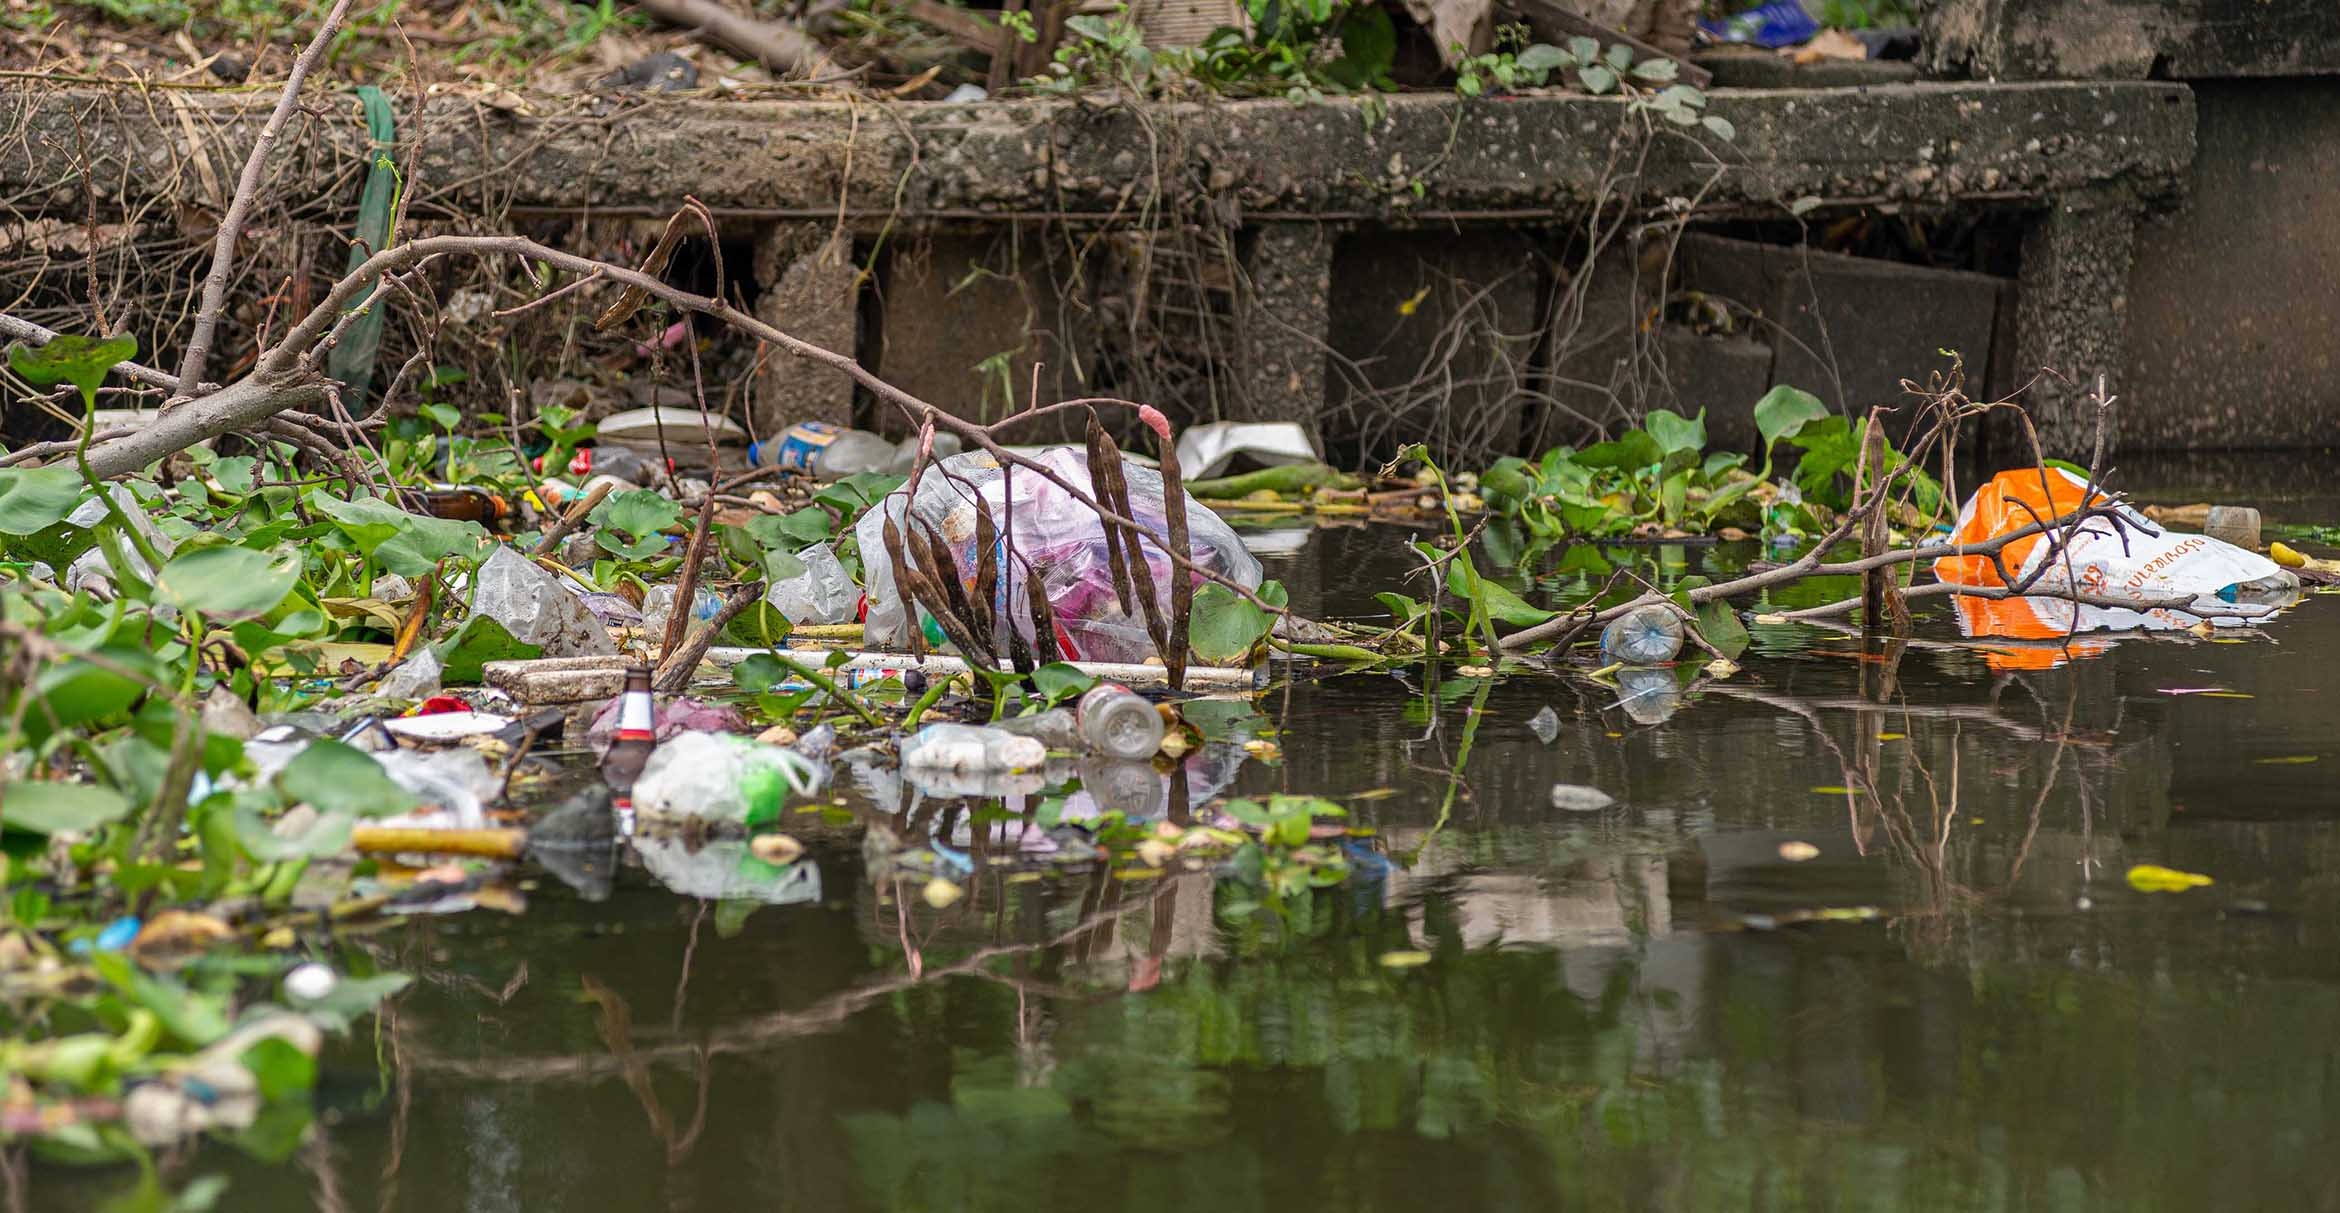 Plast waste floating in a river